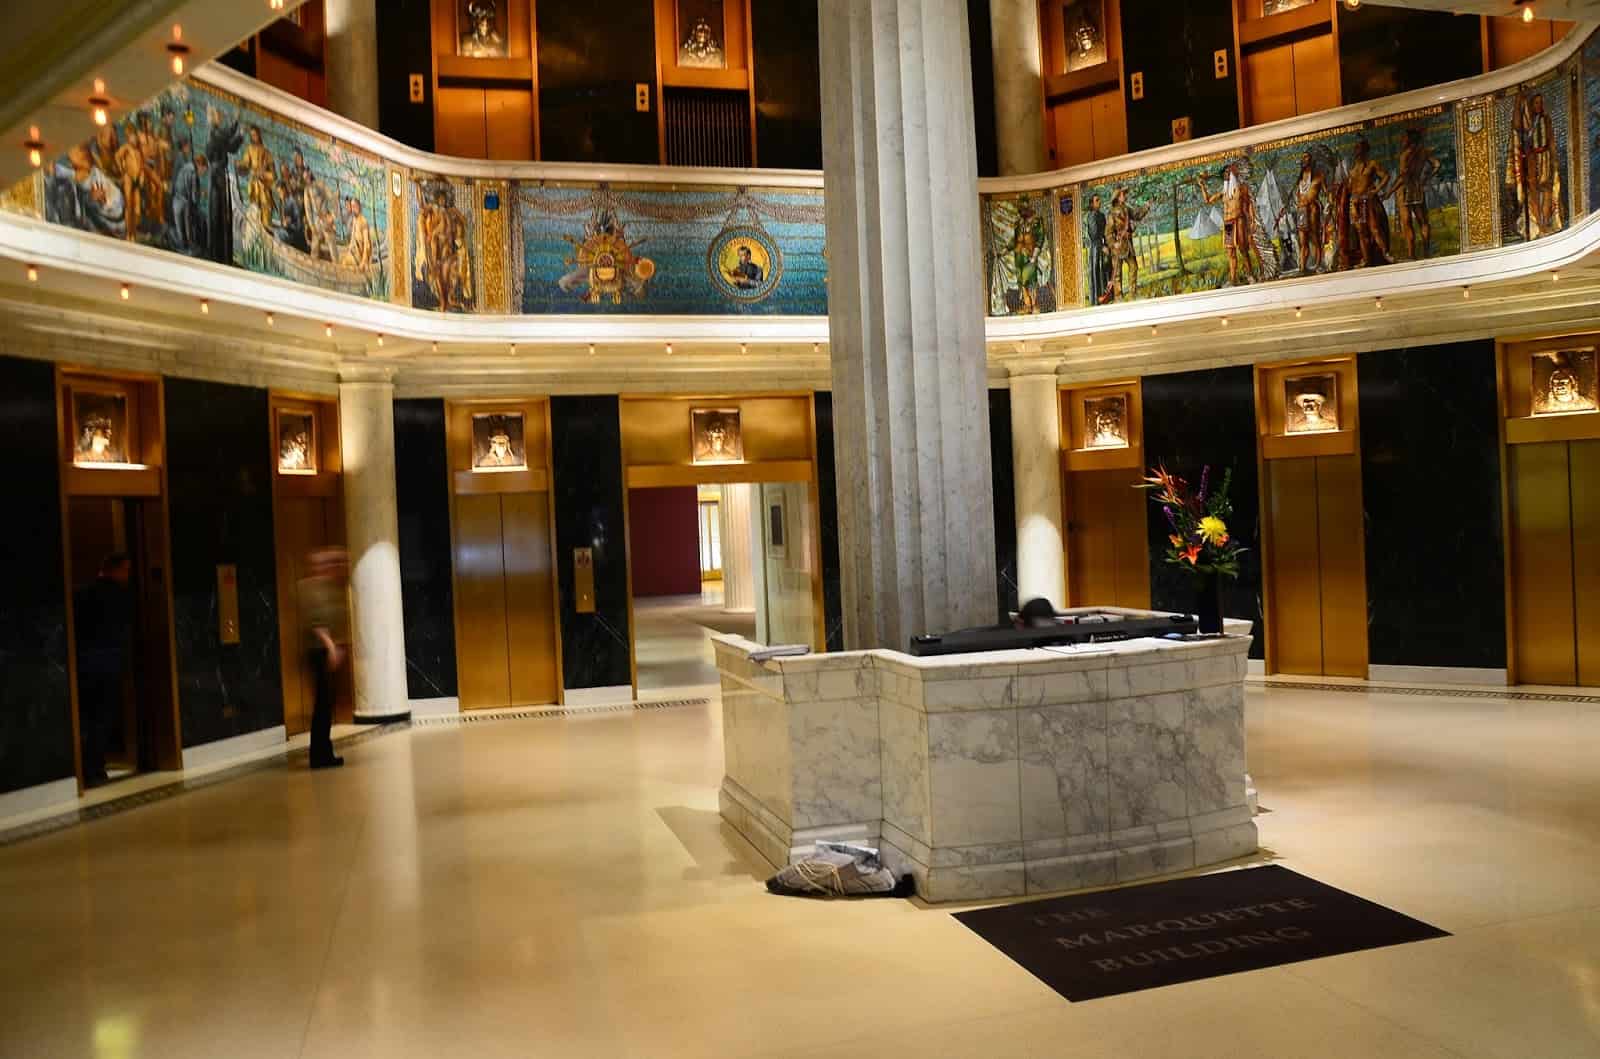 Lobby of the Marquette Building in Chicago